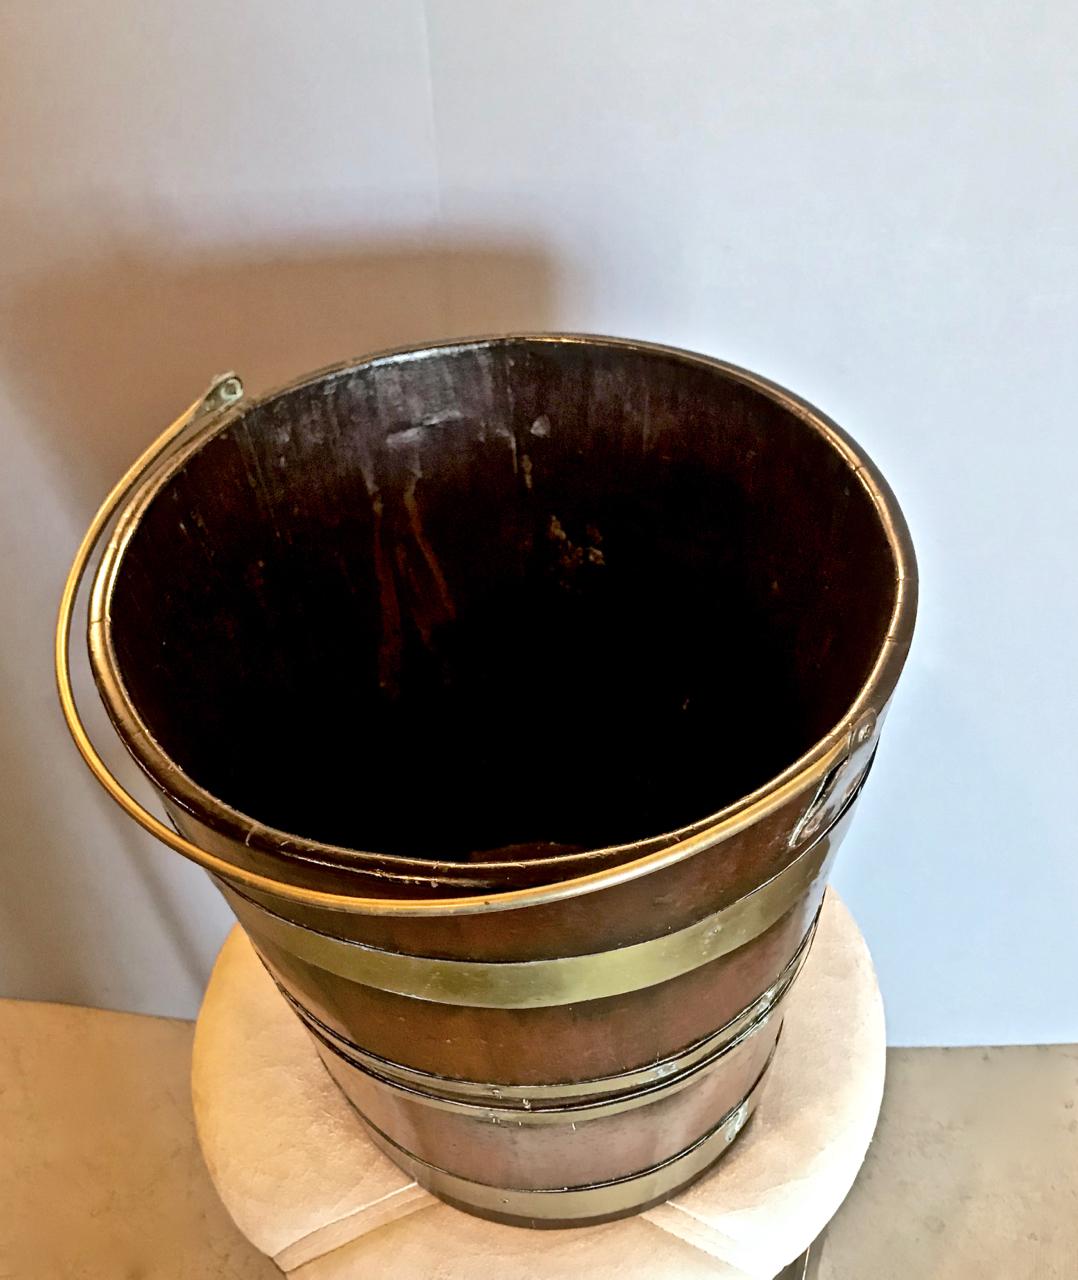 This is a classic mahogany peat bucket that is detailed with a brass handle and banding that dates to circa 1820-1830.